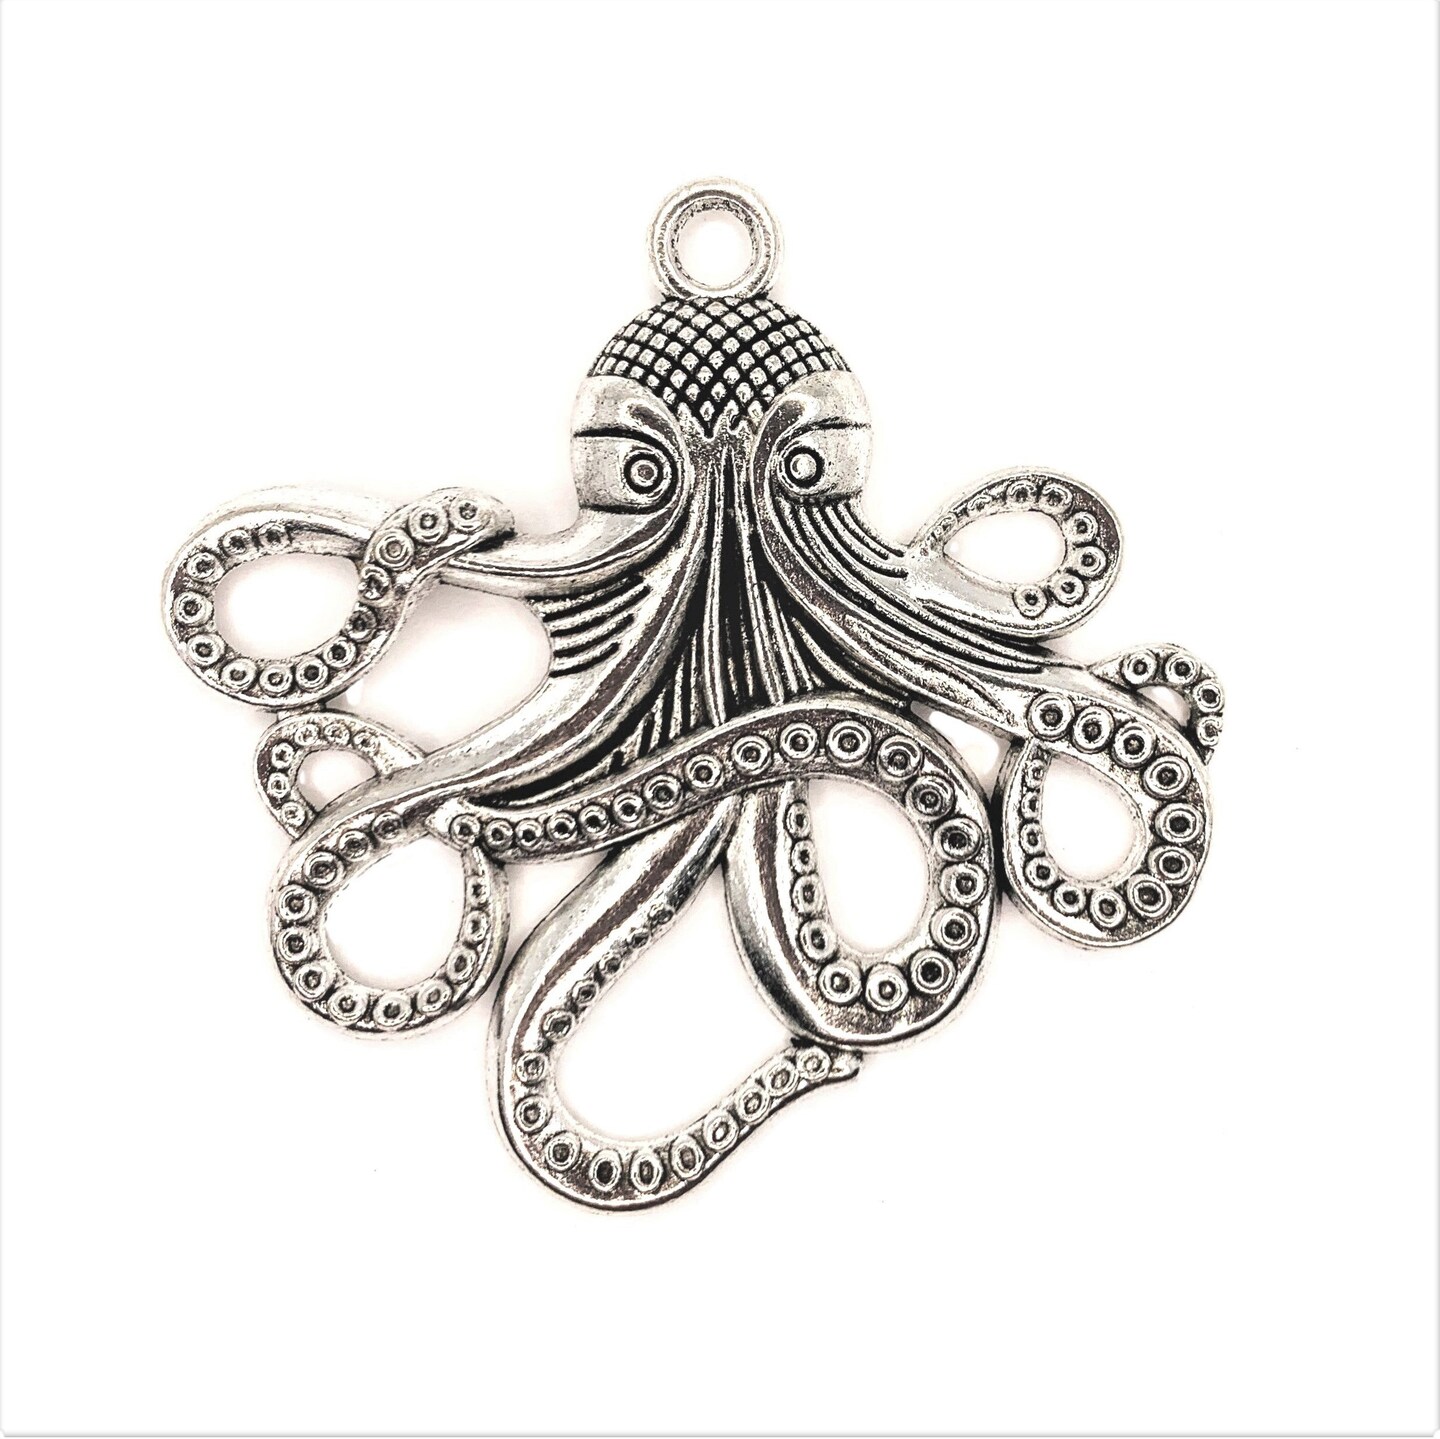 1, 4 or 20 pieces: Large Silver Octopus Cthulhu Pendant Charms